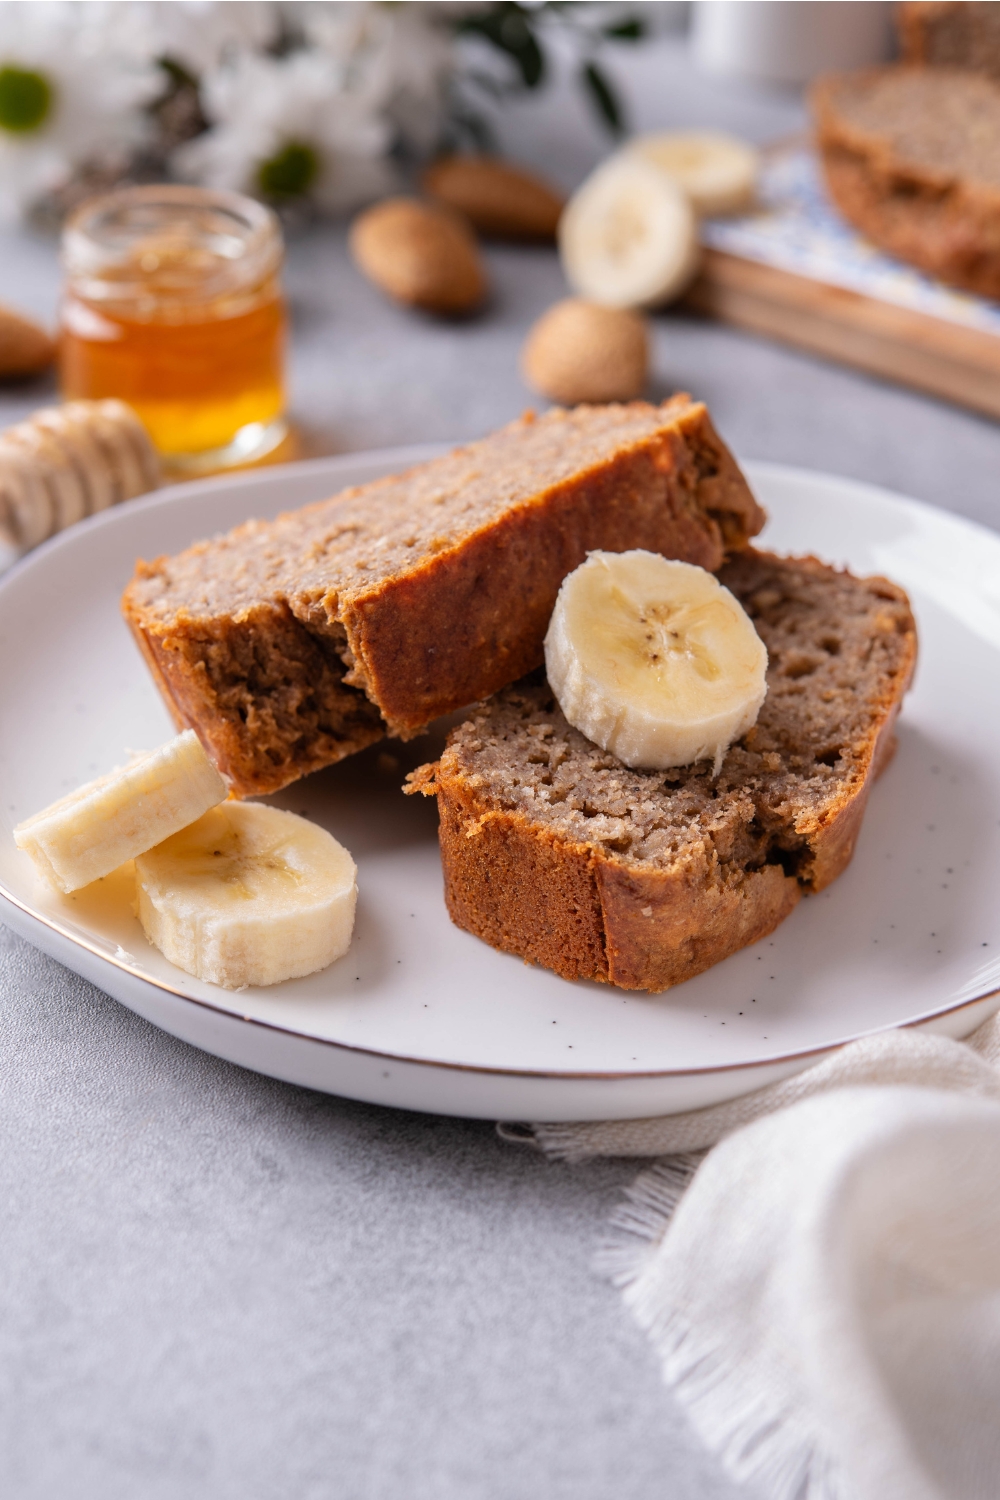 A plate with two slices of cake mix banana bread garnished with a sliced banana bread.